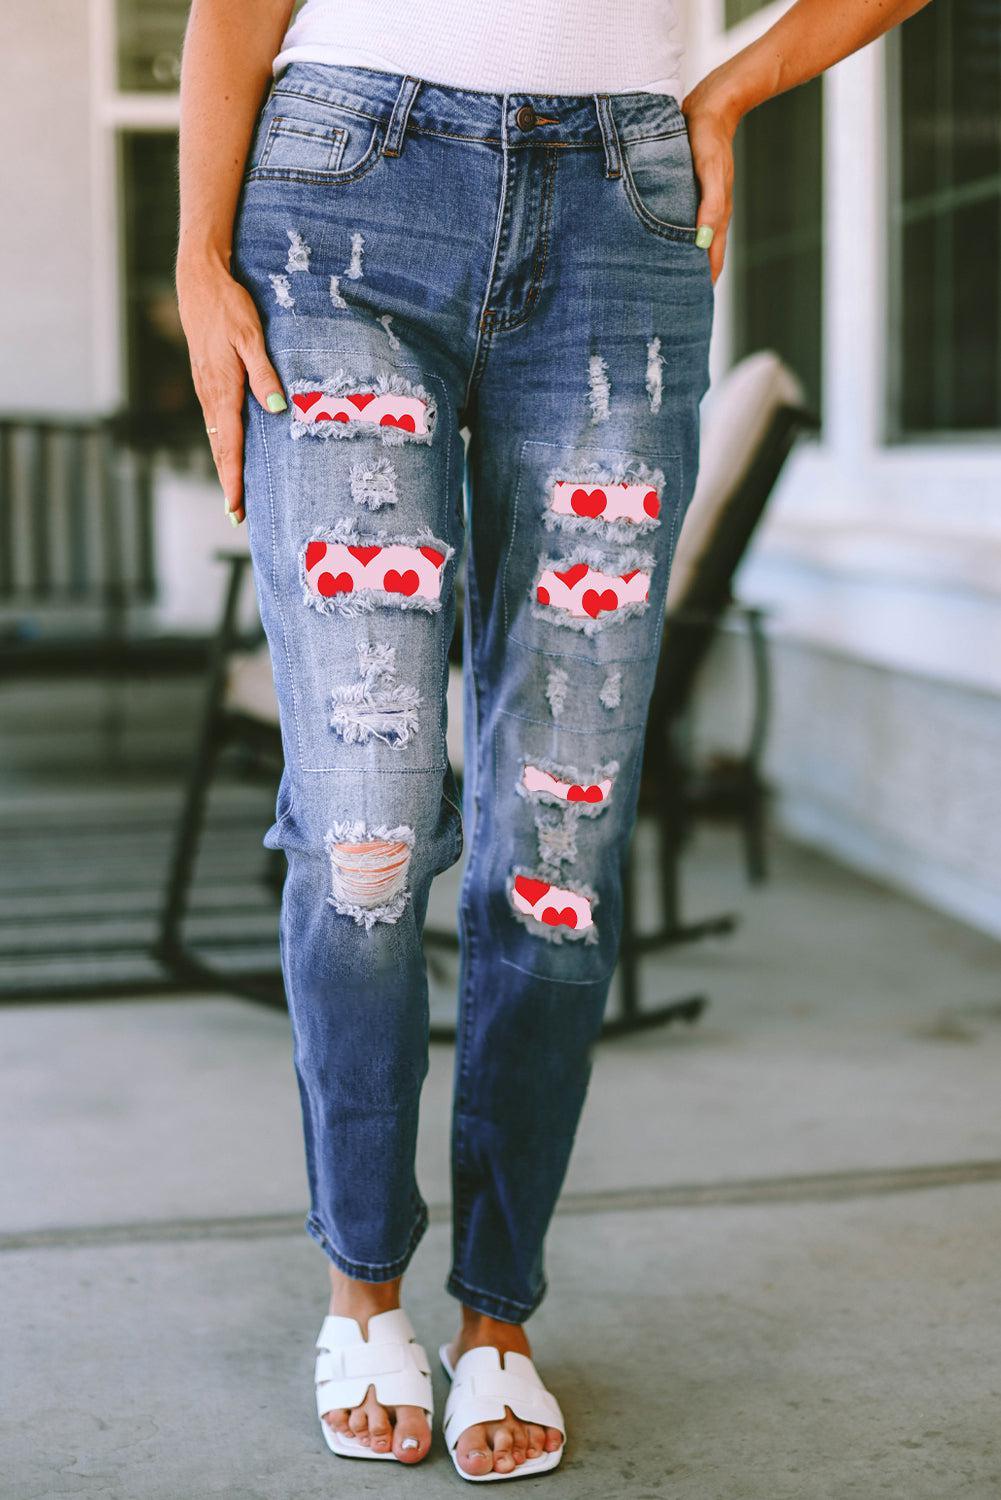 a woman wearing ripped jeans and white shoes